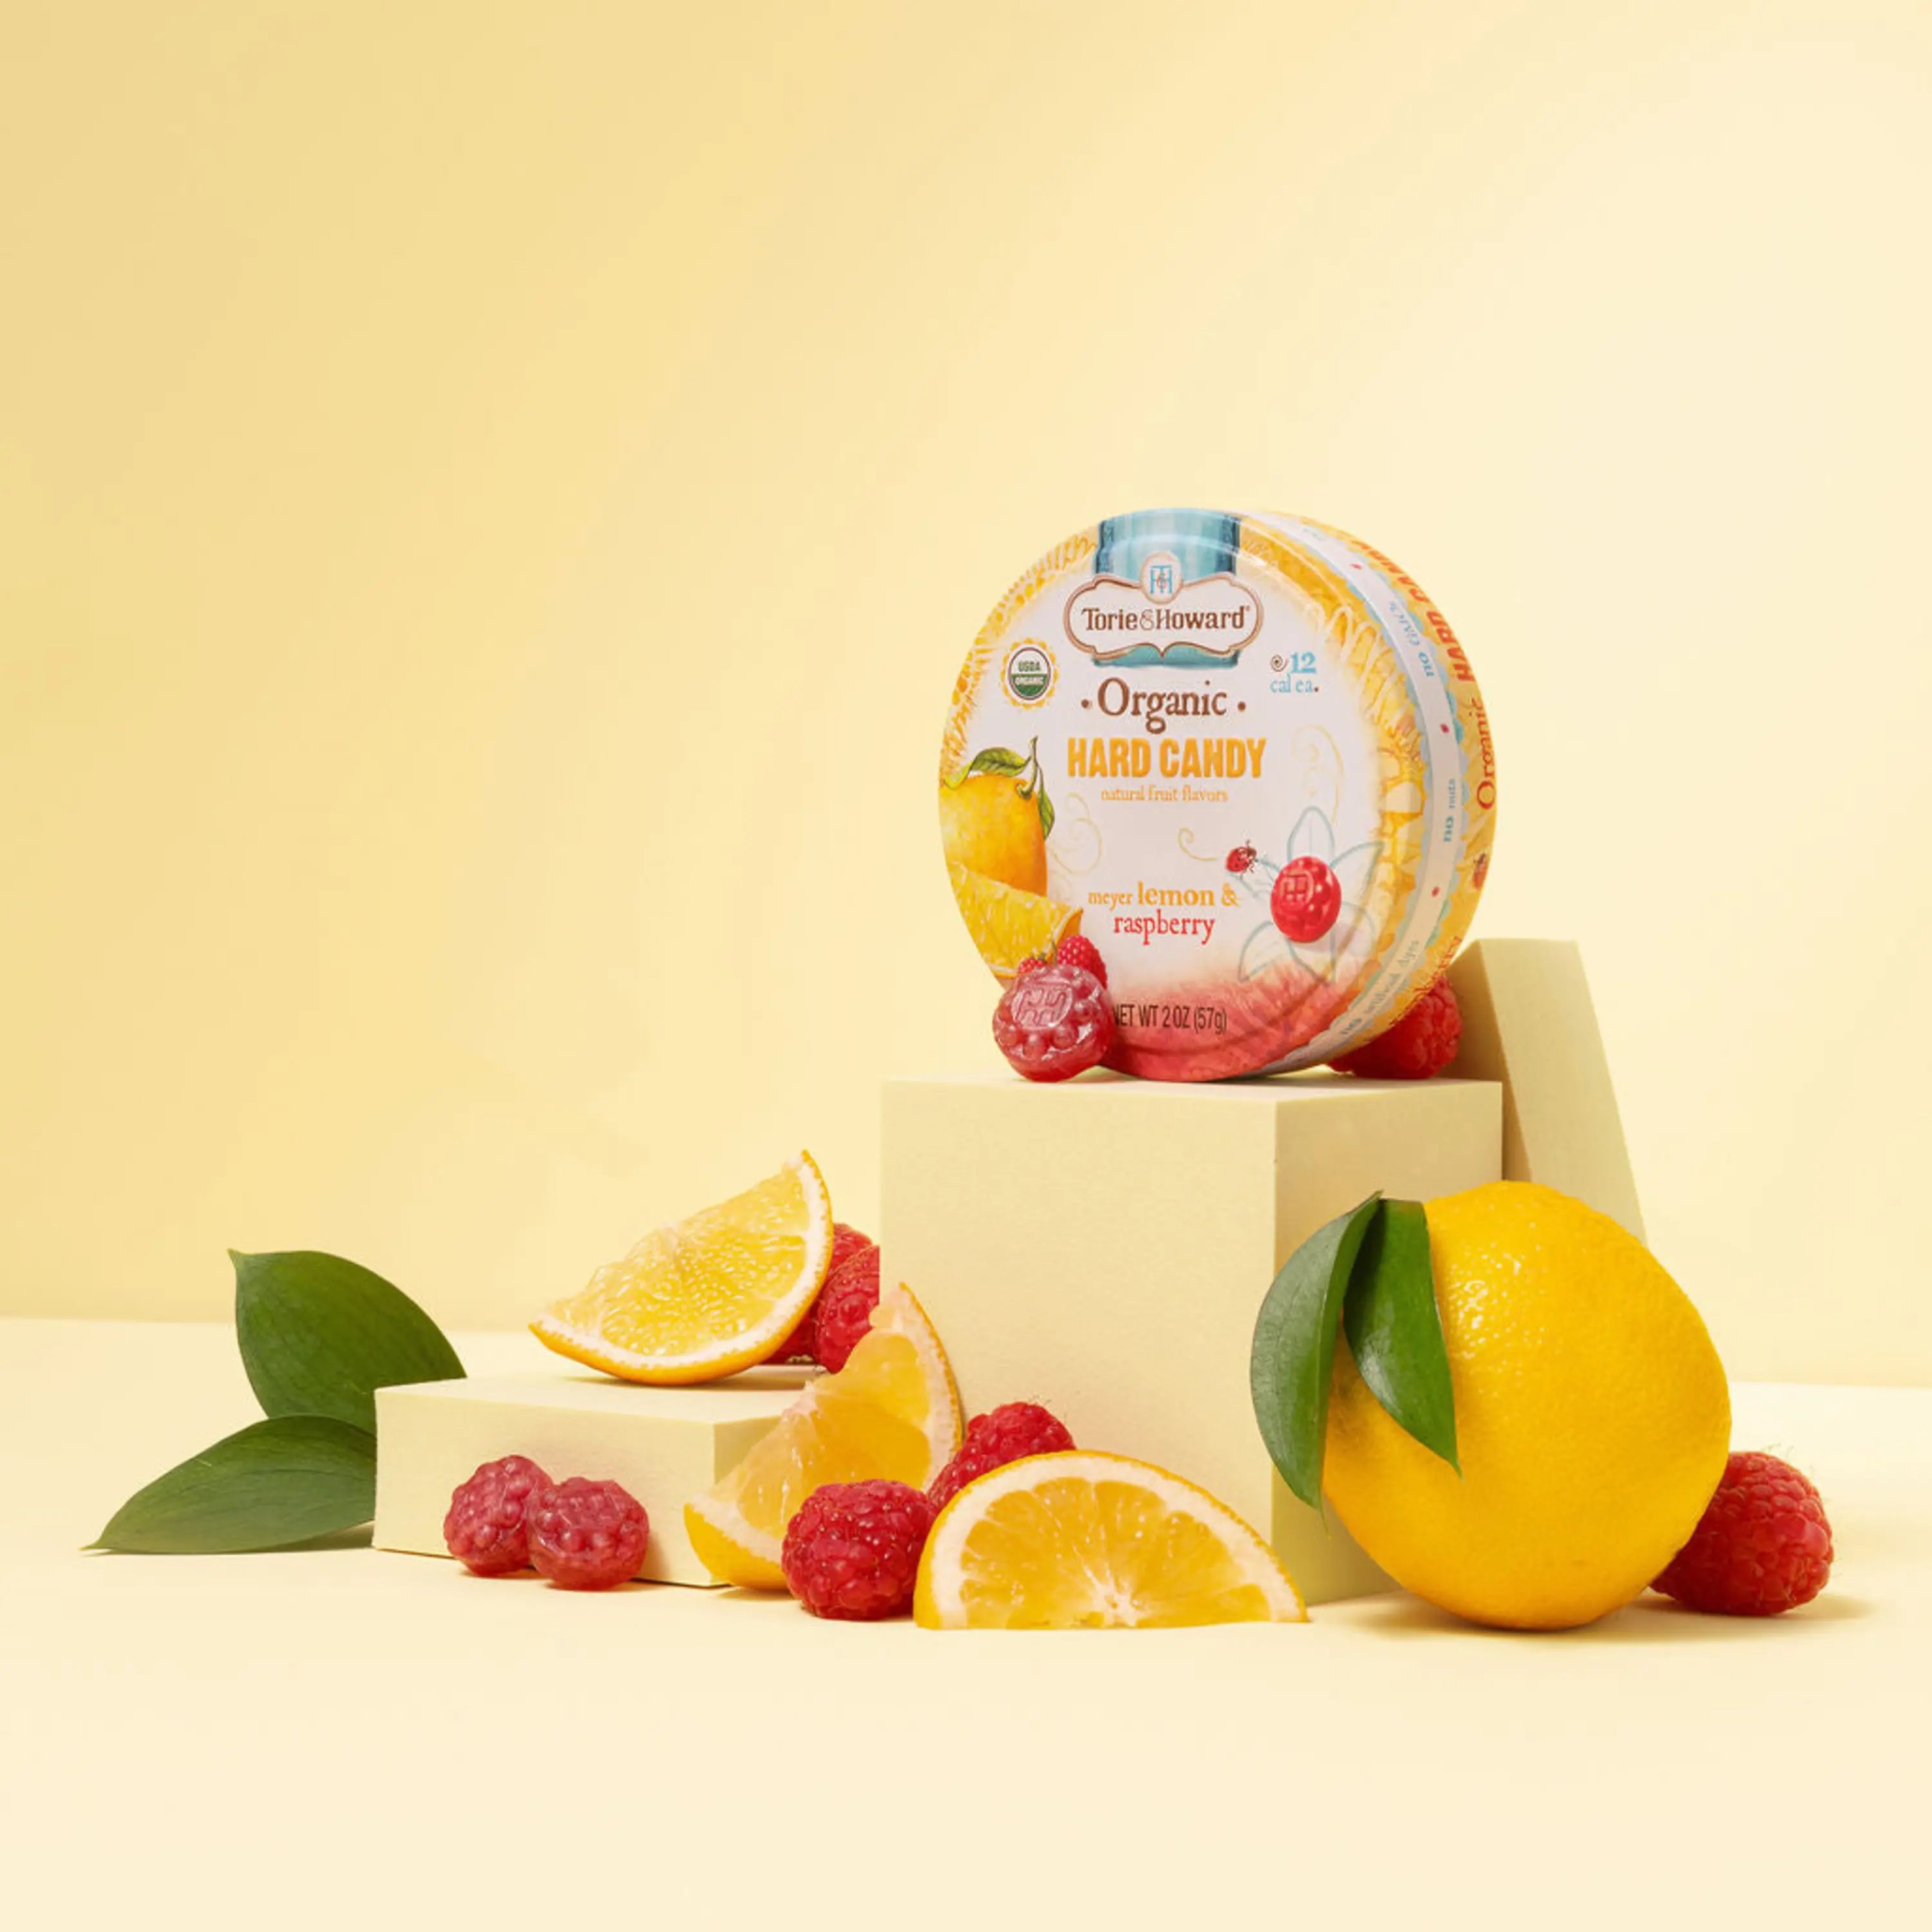 Torie & Howard Meyer Lemon & Raspberry Organic Hard Candy 2oz Tin with candies and fruits in front